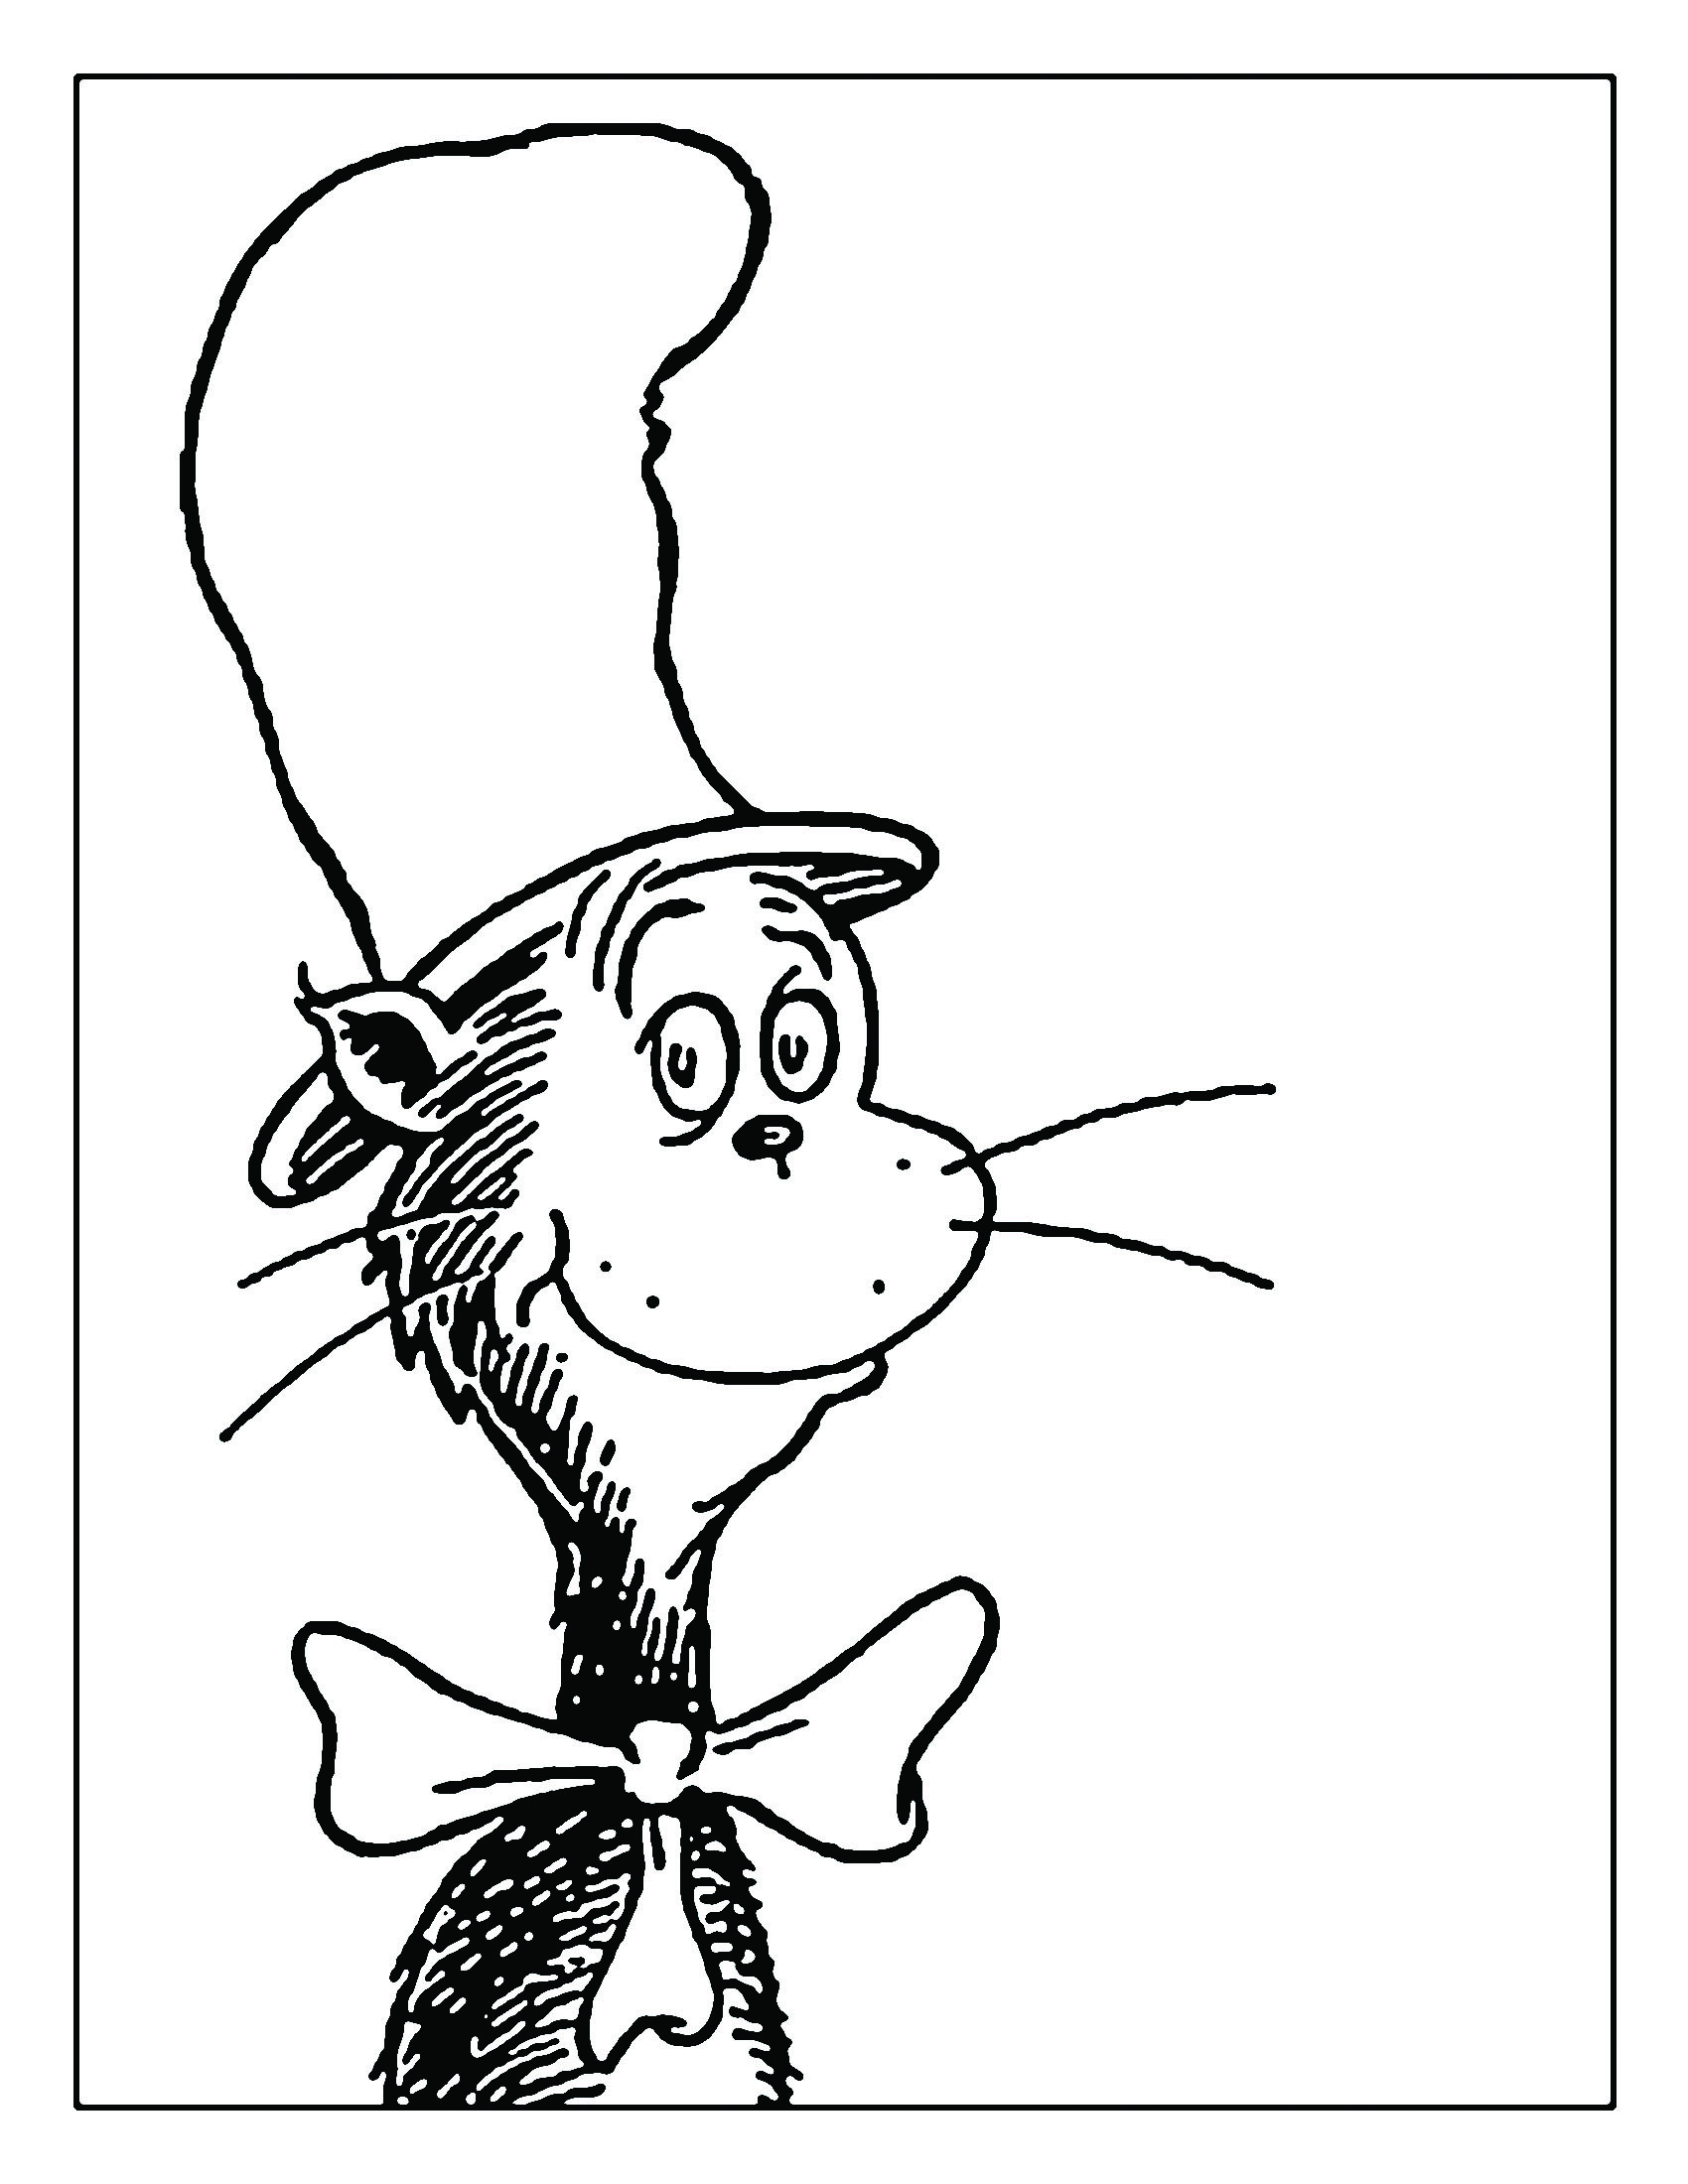 cat in the hat hat coloring page